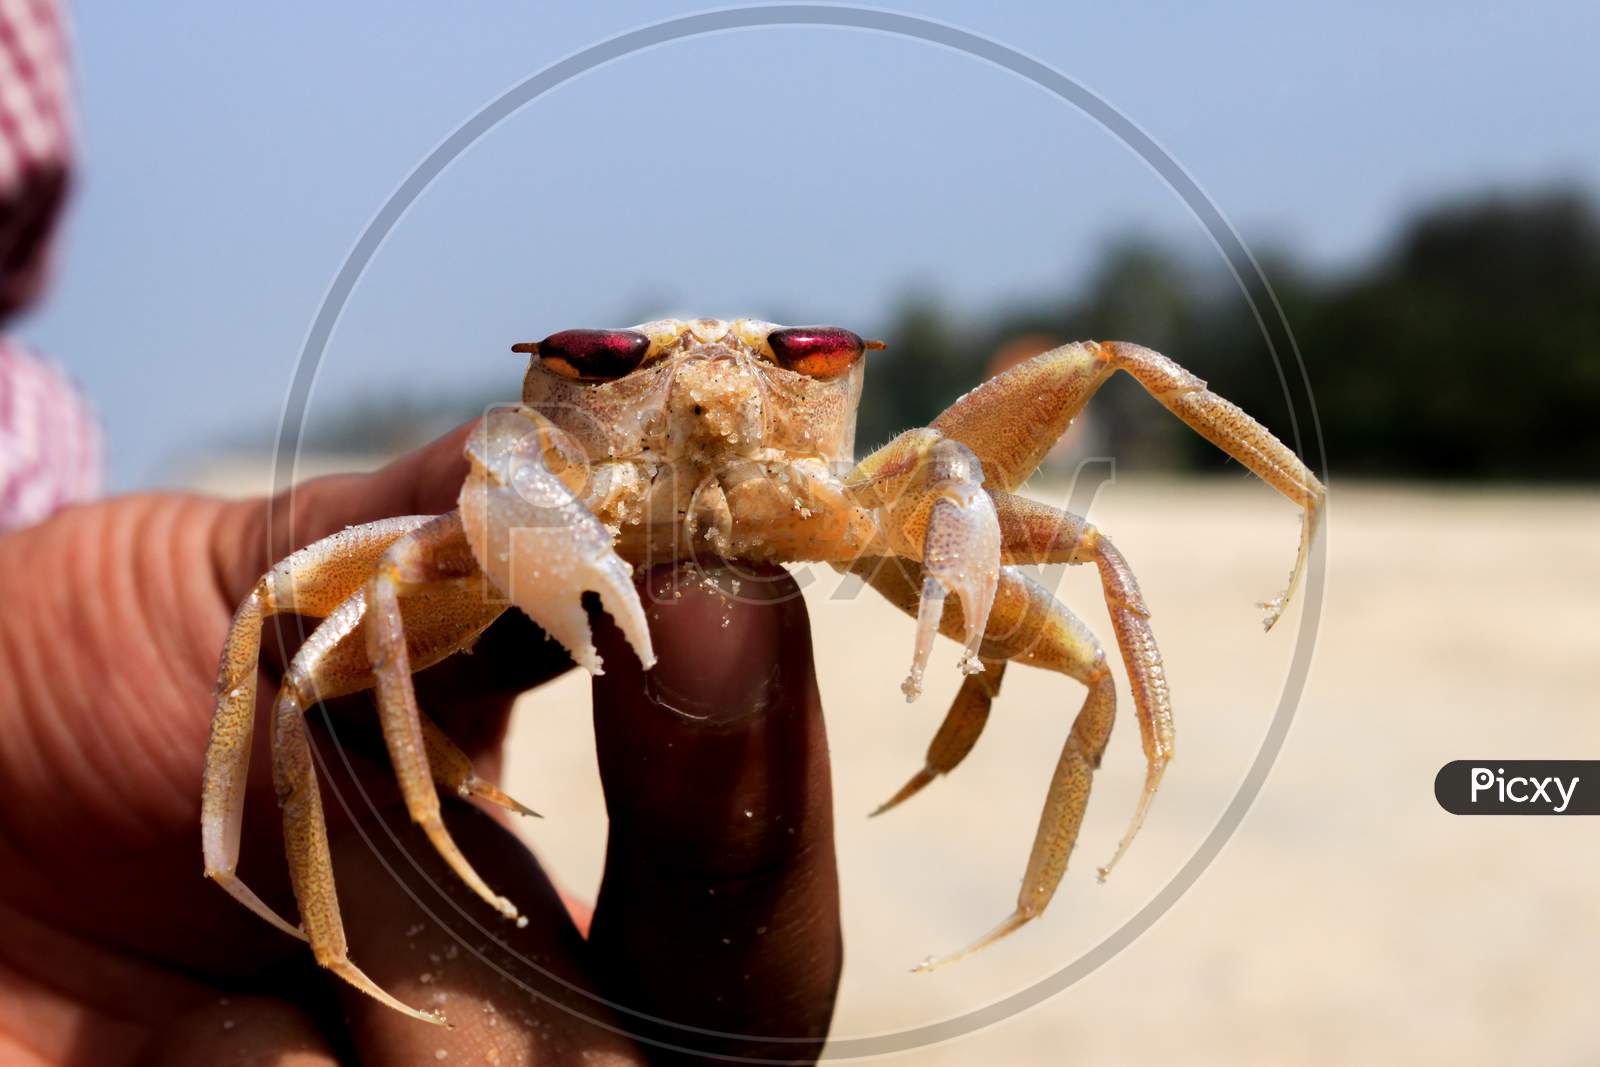 kekda - close up of a crab held in the hand